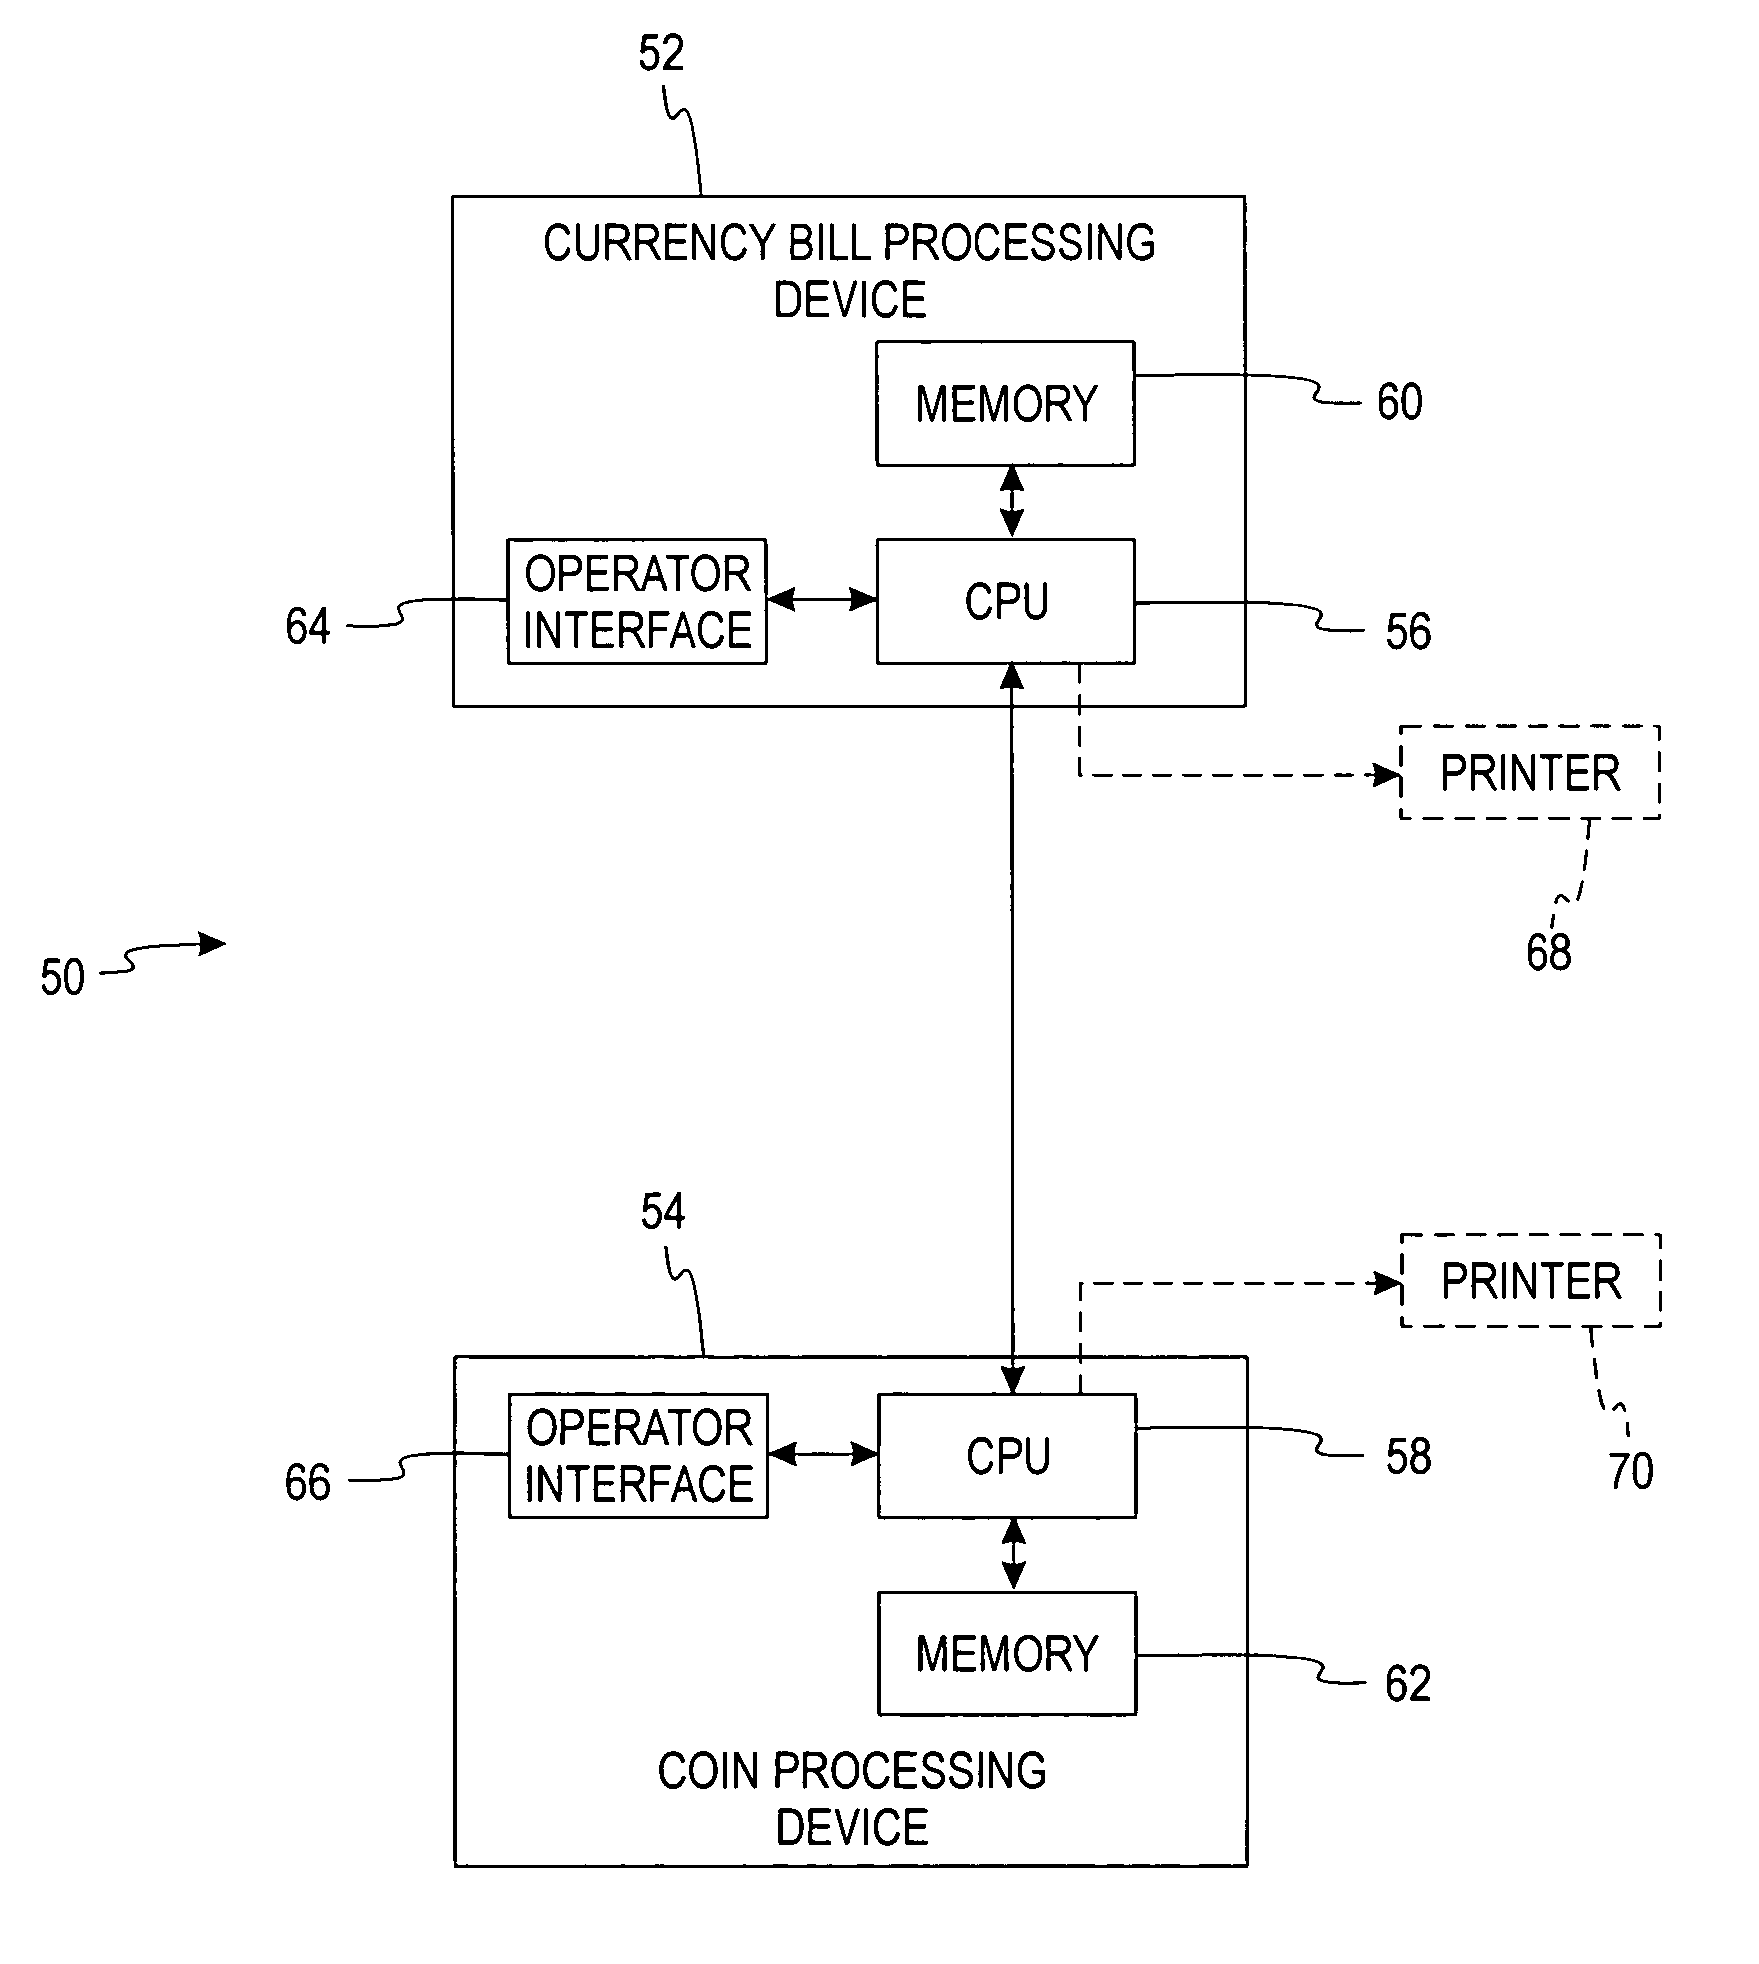 Method and apparatus for processing currency bills and coins